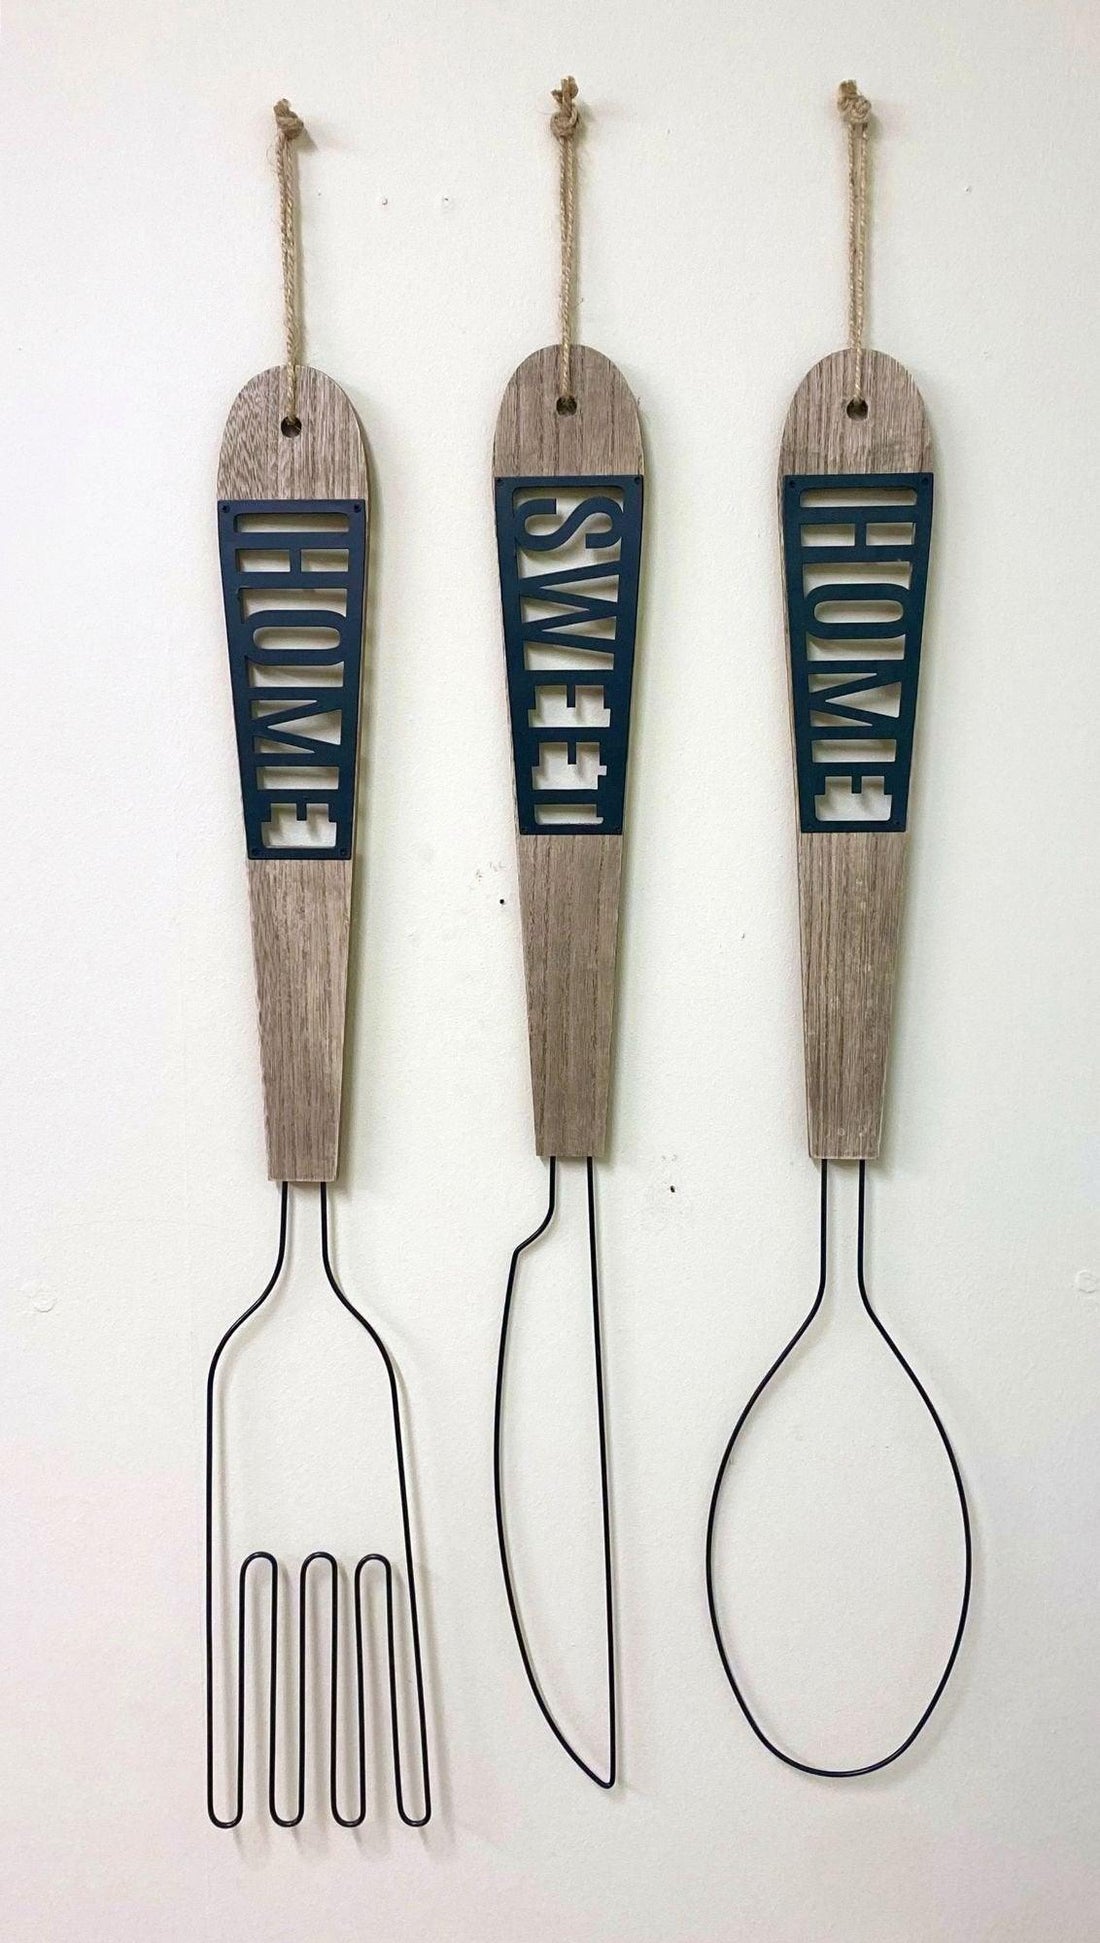 Home Sweet Home Cutlery Wall Hanging Decoration - £38.99 - Decorative Kitchen Items 